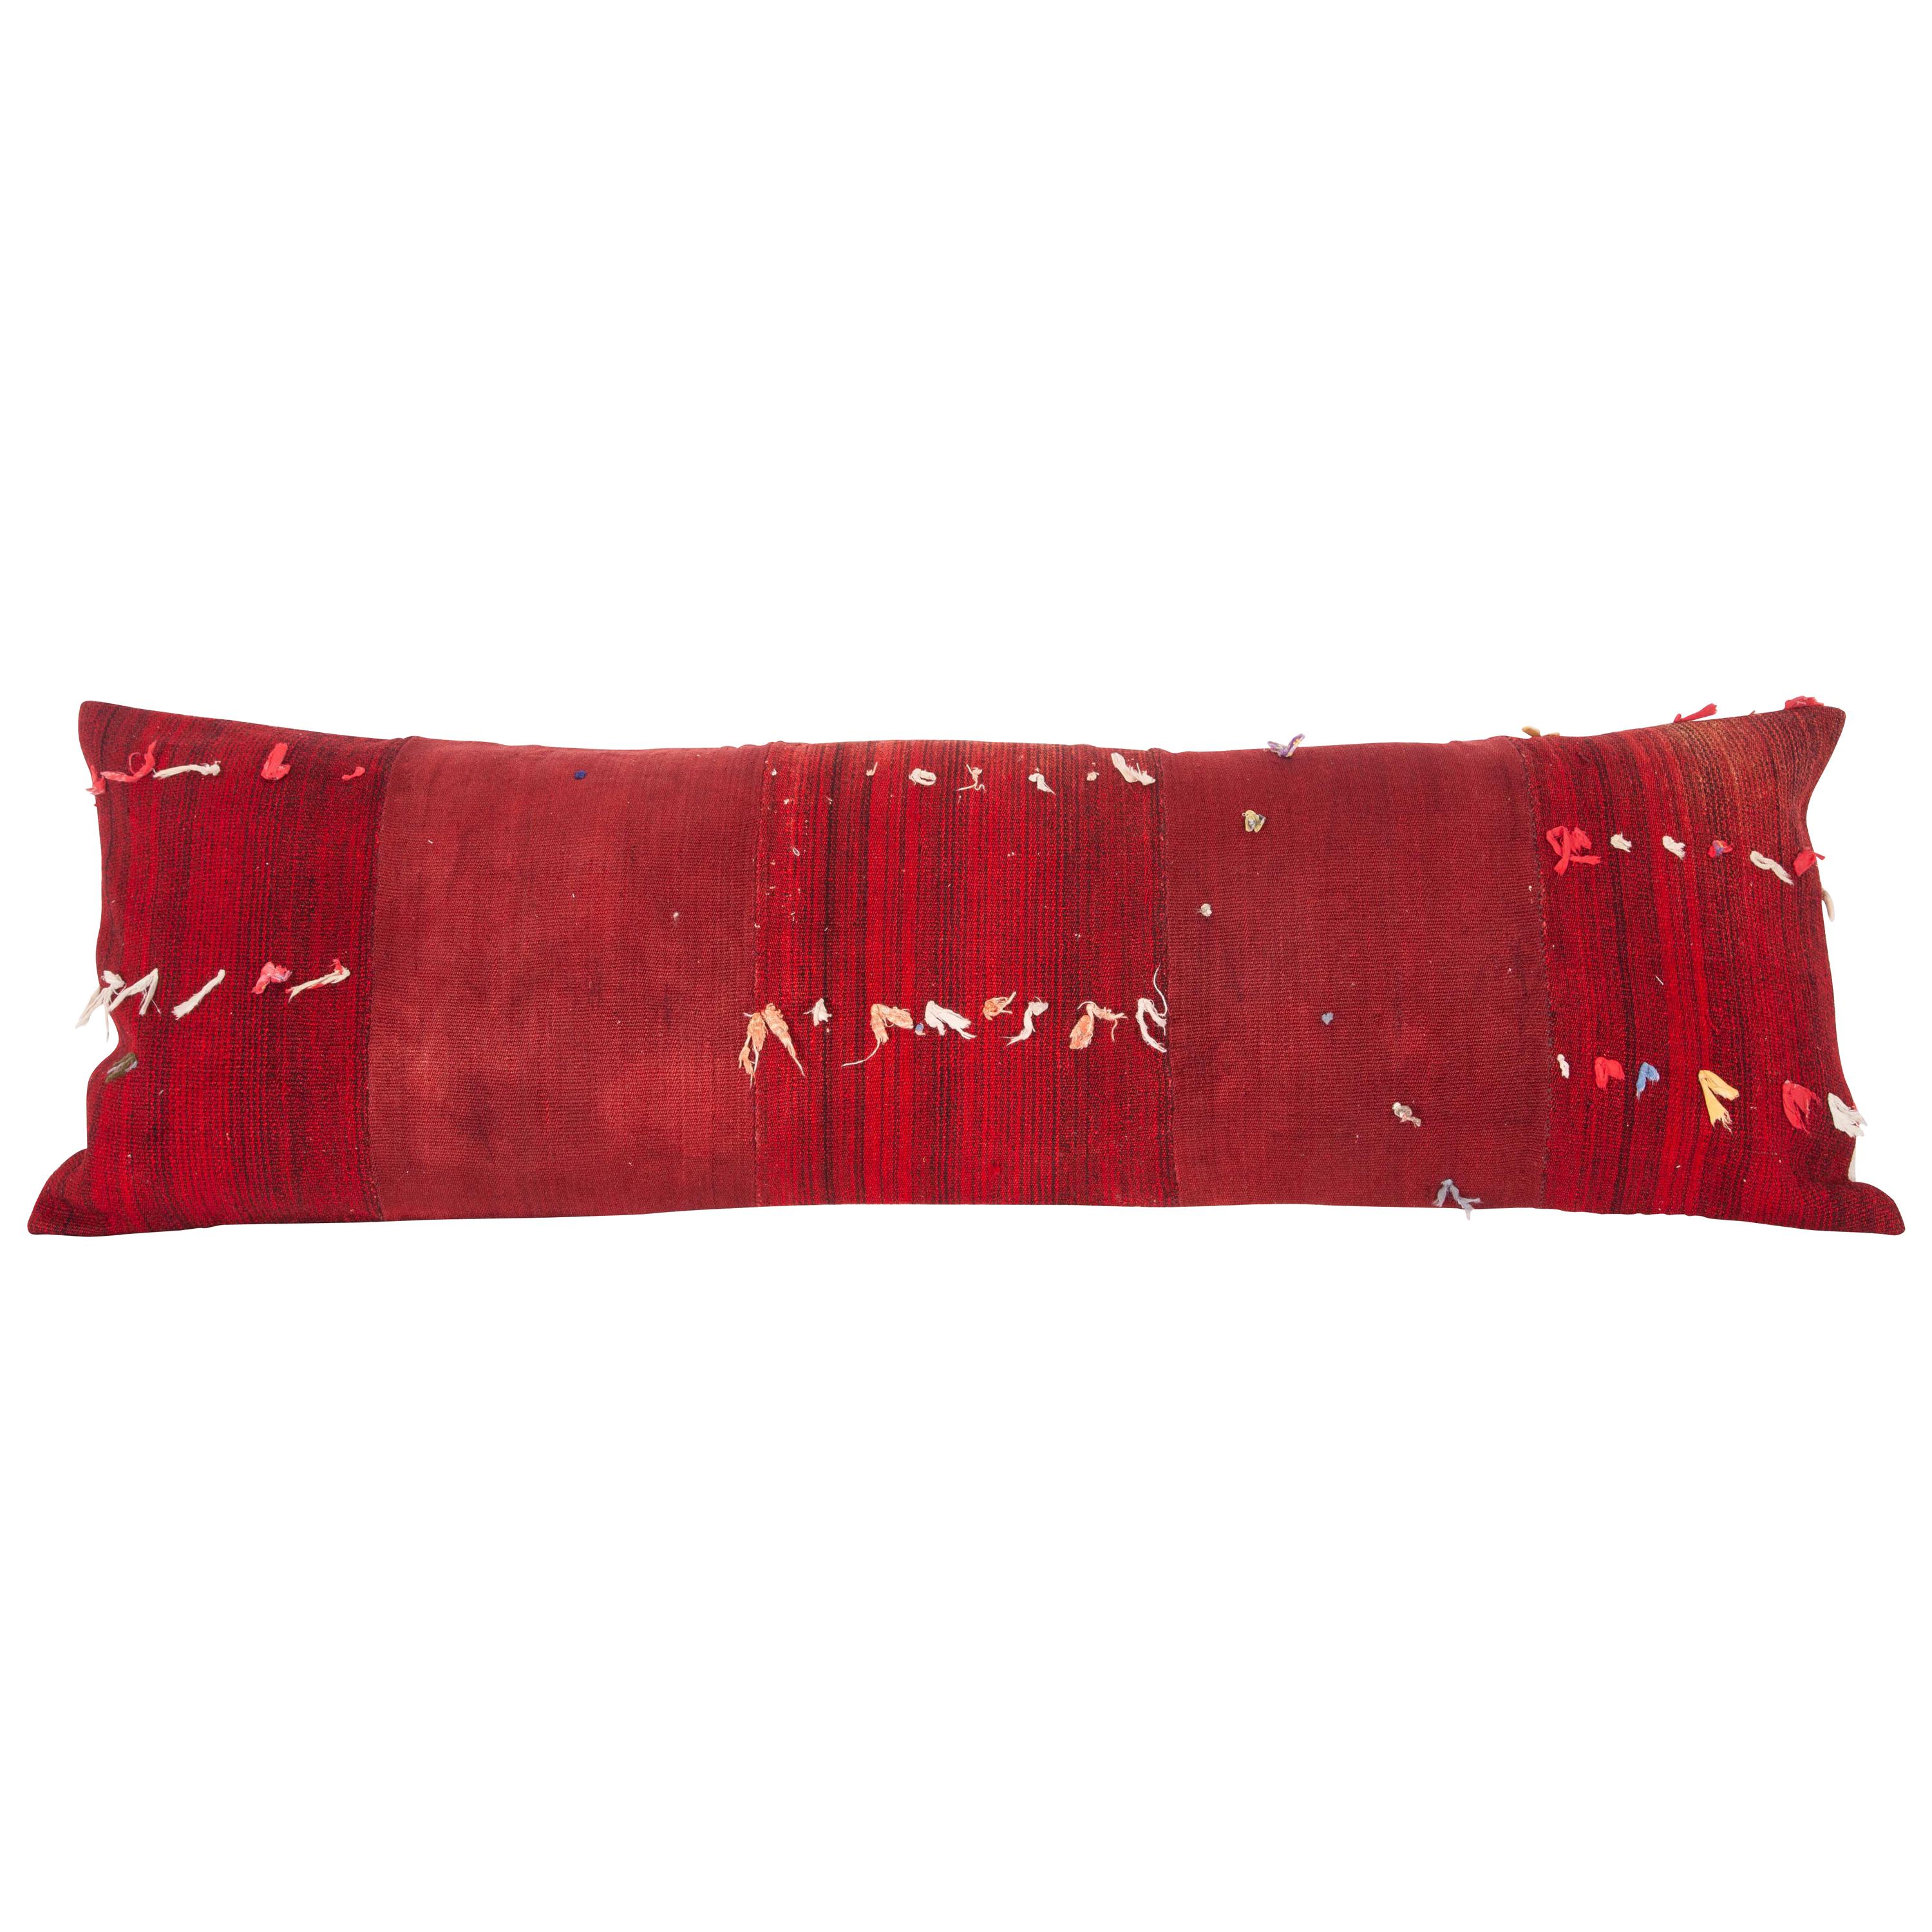 Lumbar Pillow Case Fashioned from a Mid-20th Century Anatolian Cover